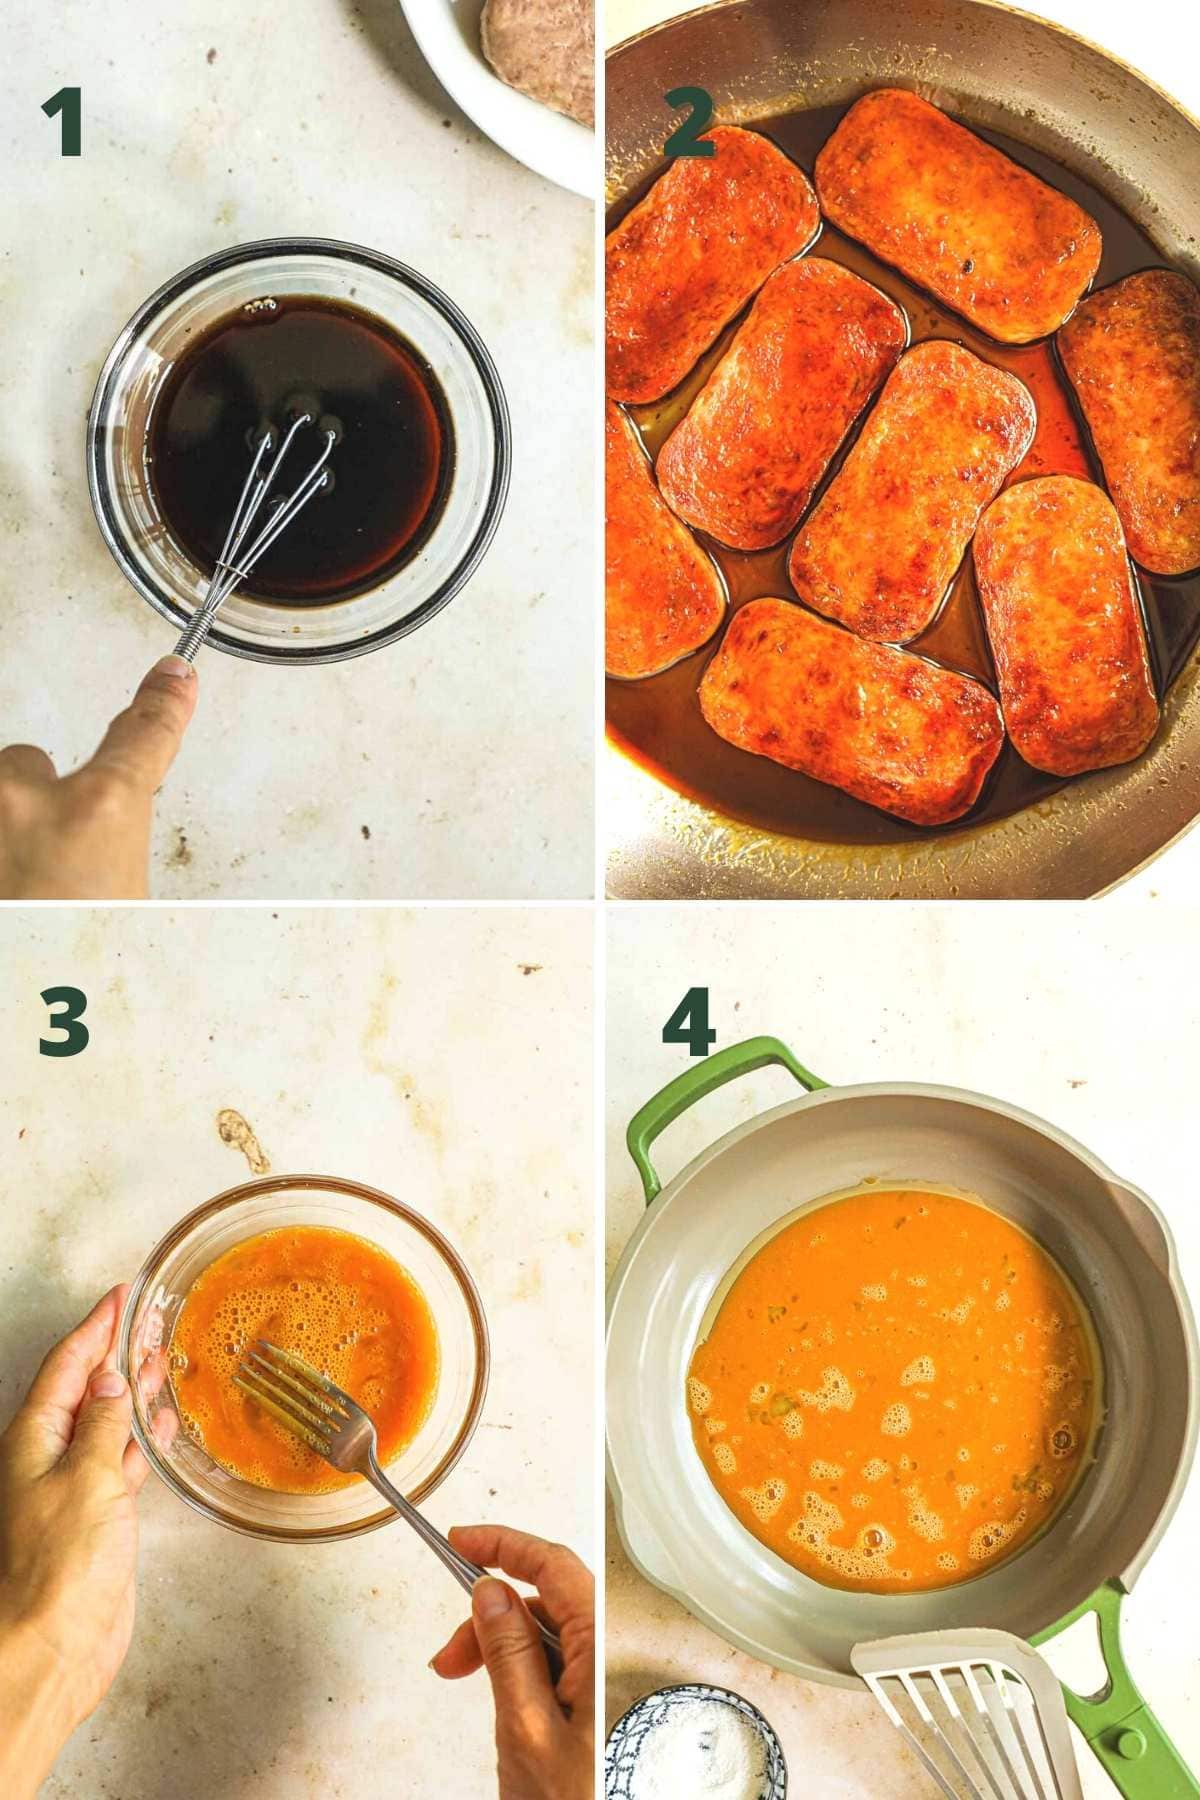 Steps to make spam musubi with egg, including making the teriyaki sauce, frying the spam, mixing the egg with soy sauce and sugar, and cooking the egg in a pan.